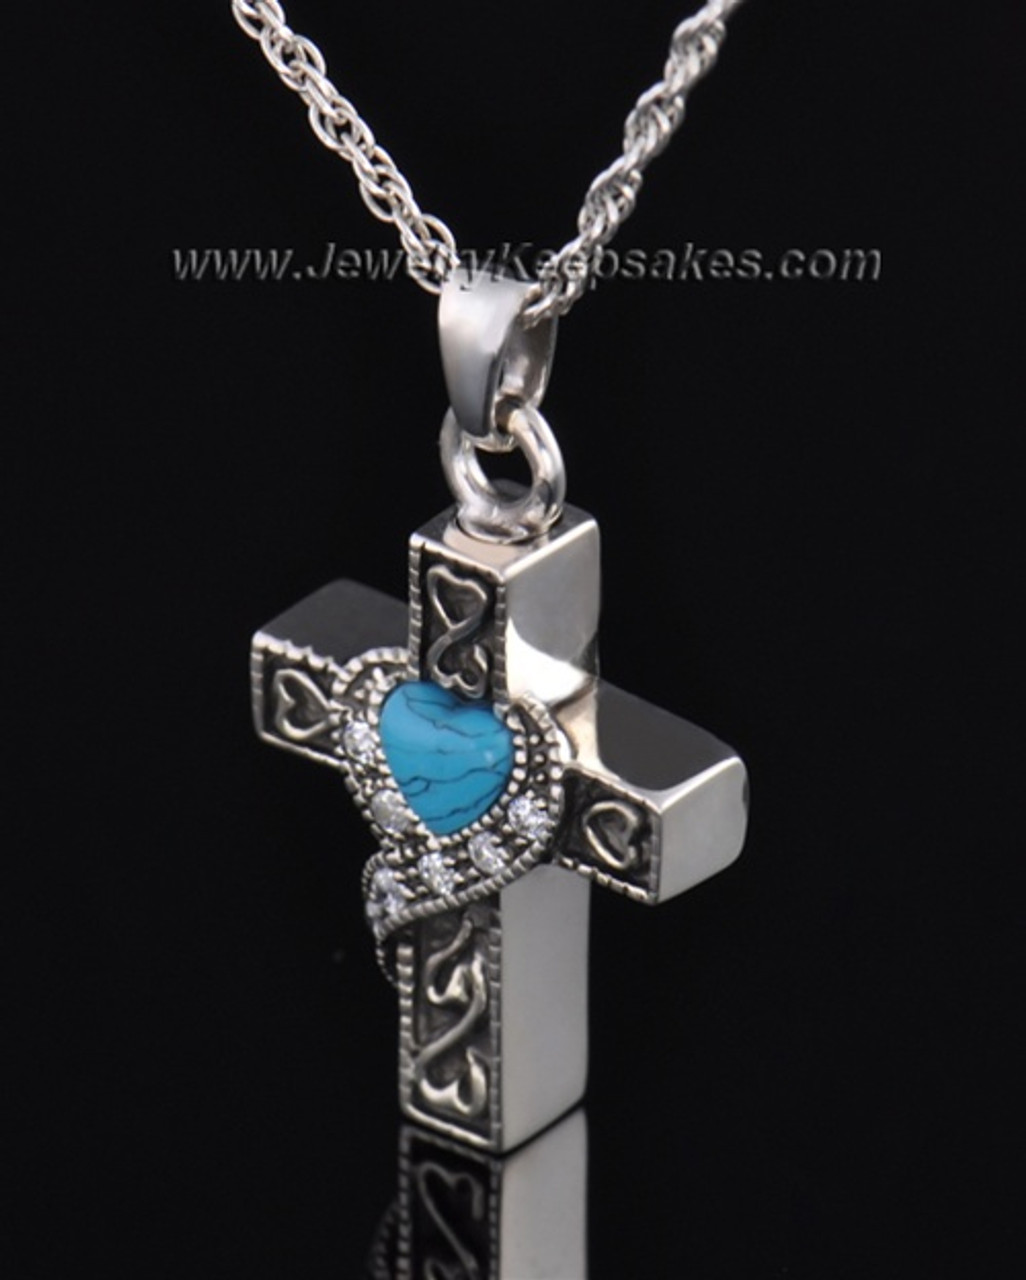 Genuine Natural #8 Turquoise Sterling Silver Cross Pendant